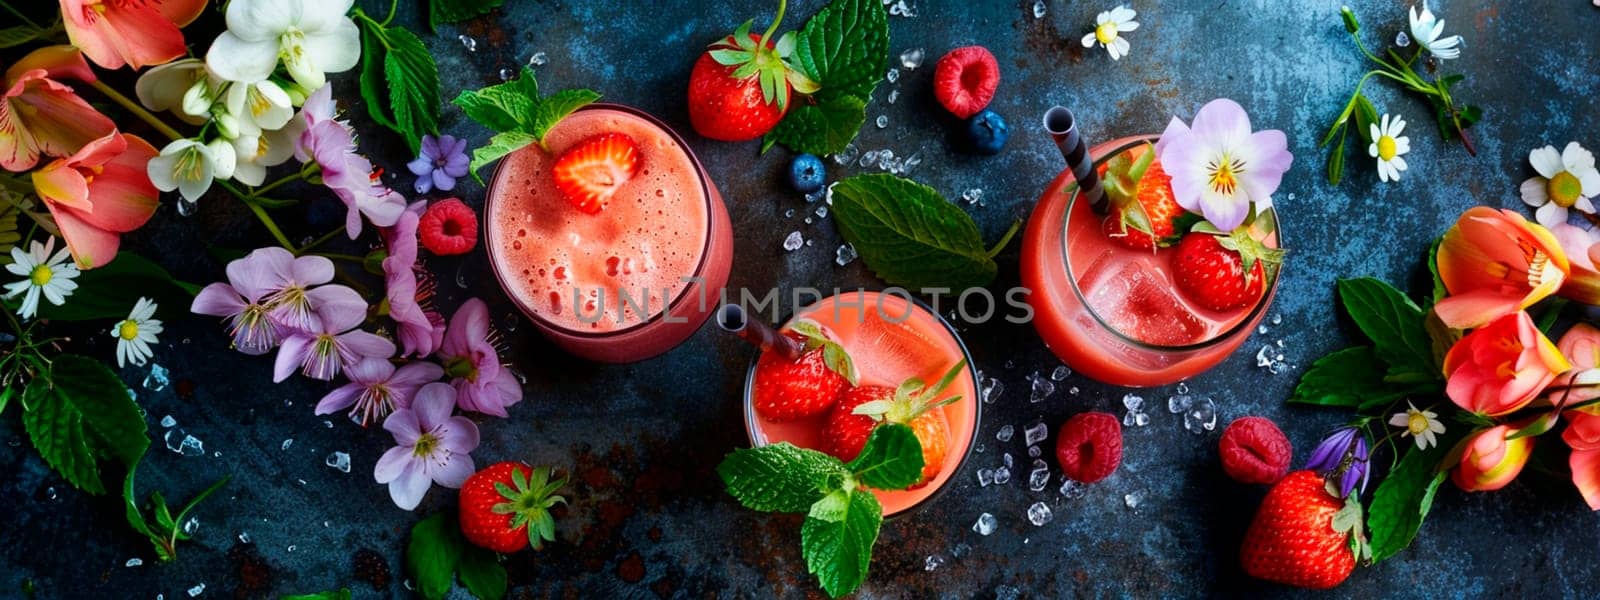 different fruit smoothies in a glass. selective focus. drink.